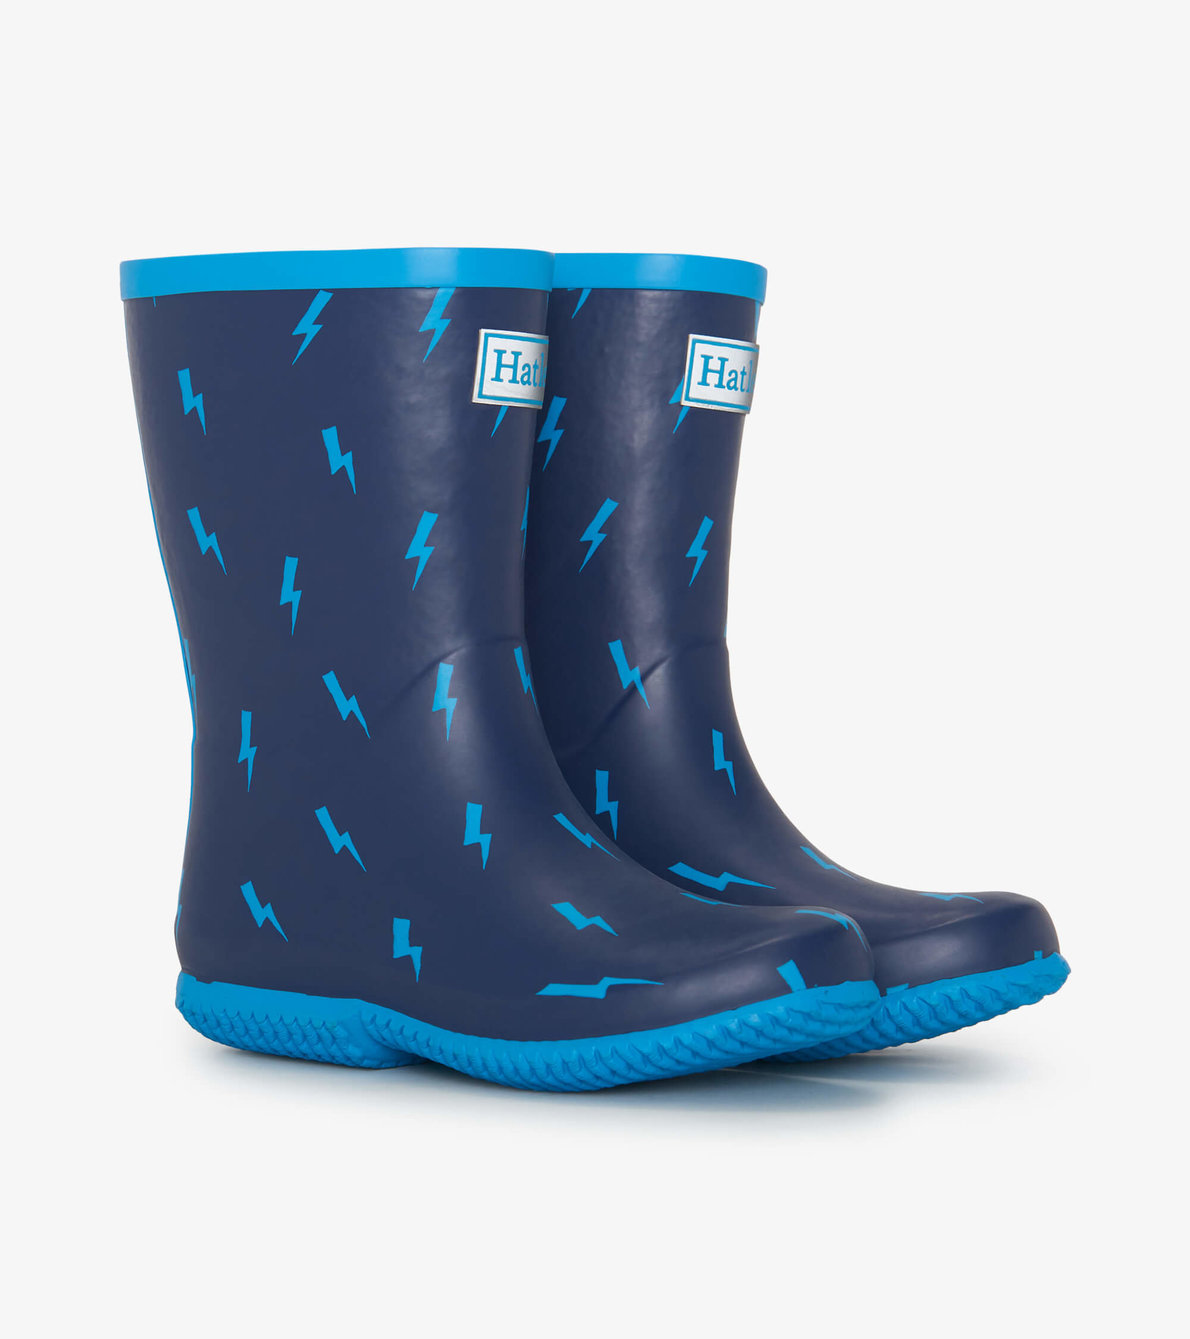 View larger image of Boys Lightning Storm Packable Wellies